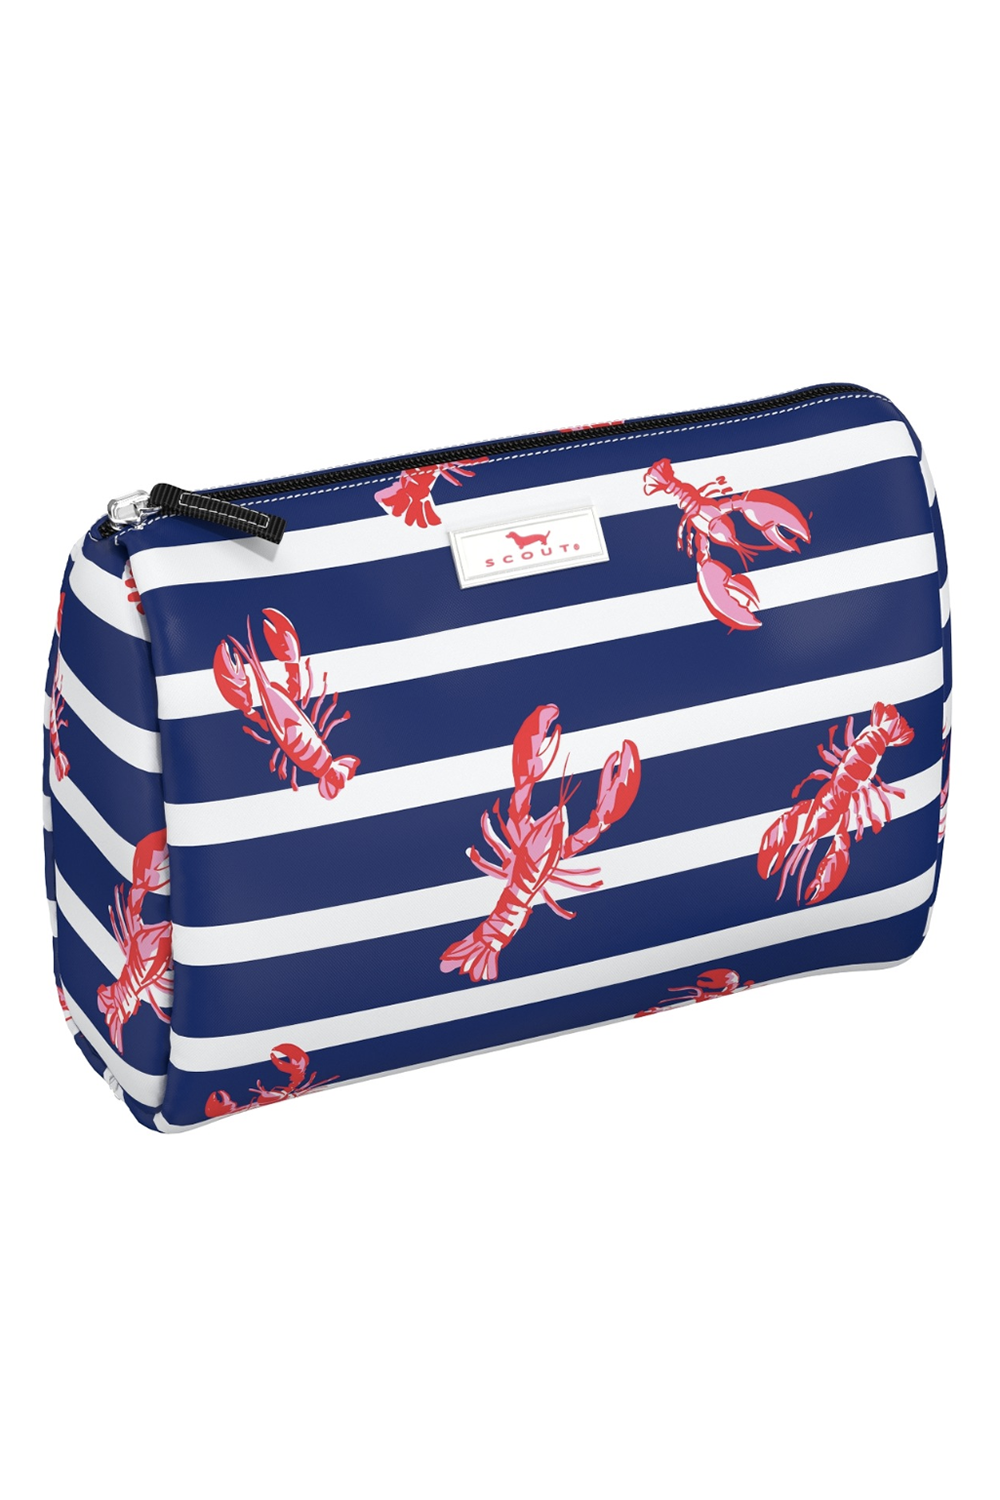 Packin' Heat Cosmetic Bag - "Catch of the Day" SUM24